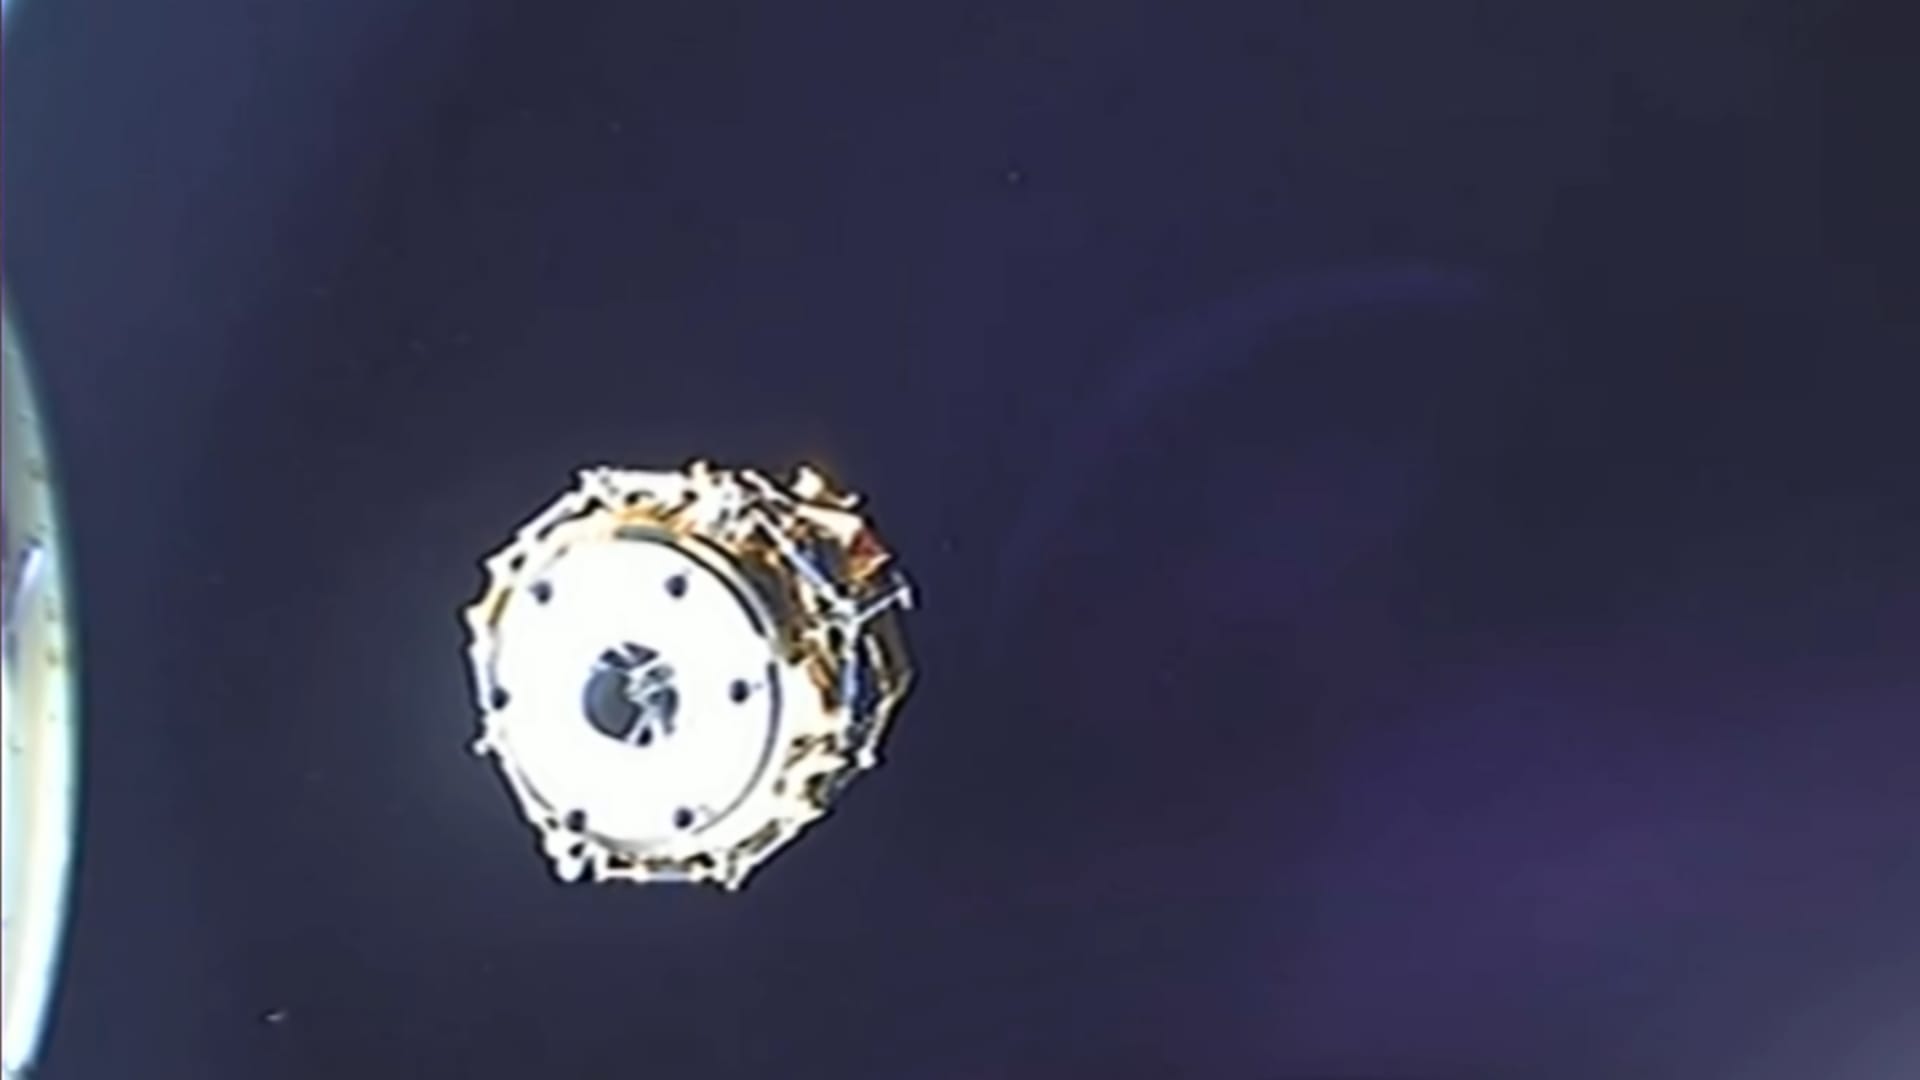 The ispace Mission 1 spacecraft deploys from the upper stage of the Falcon 9 rocket on Dec. 11, 2022.